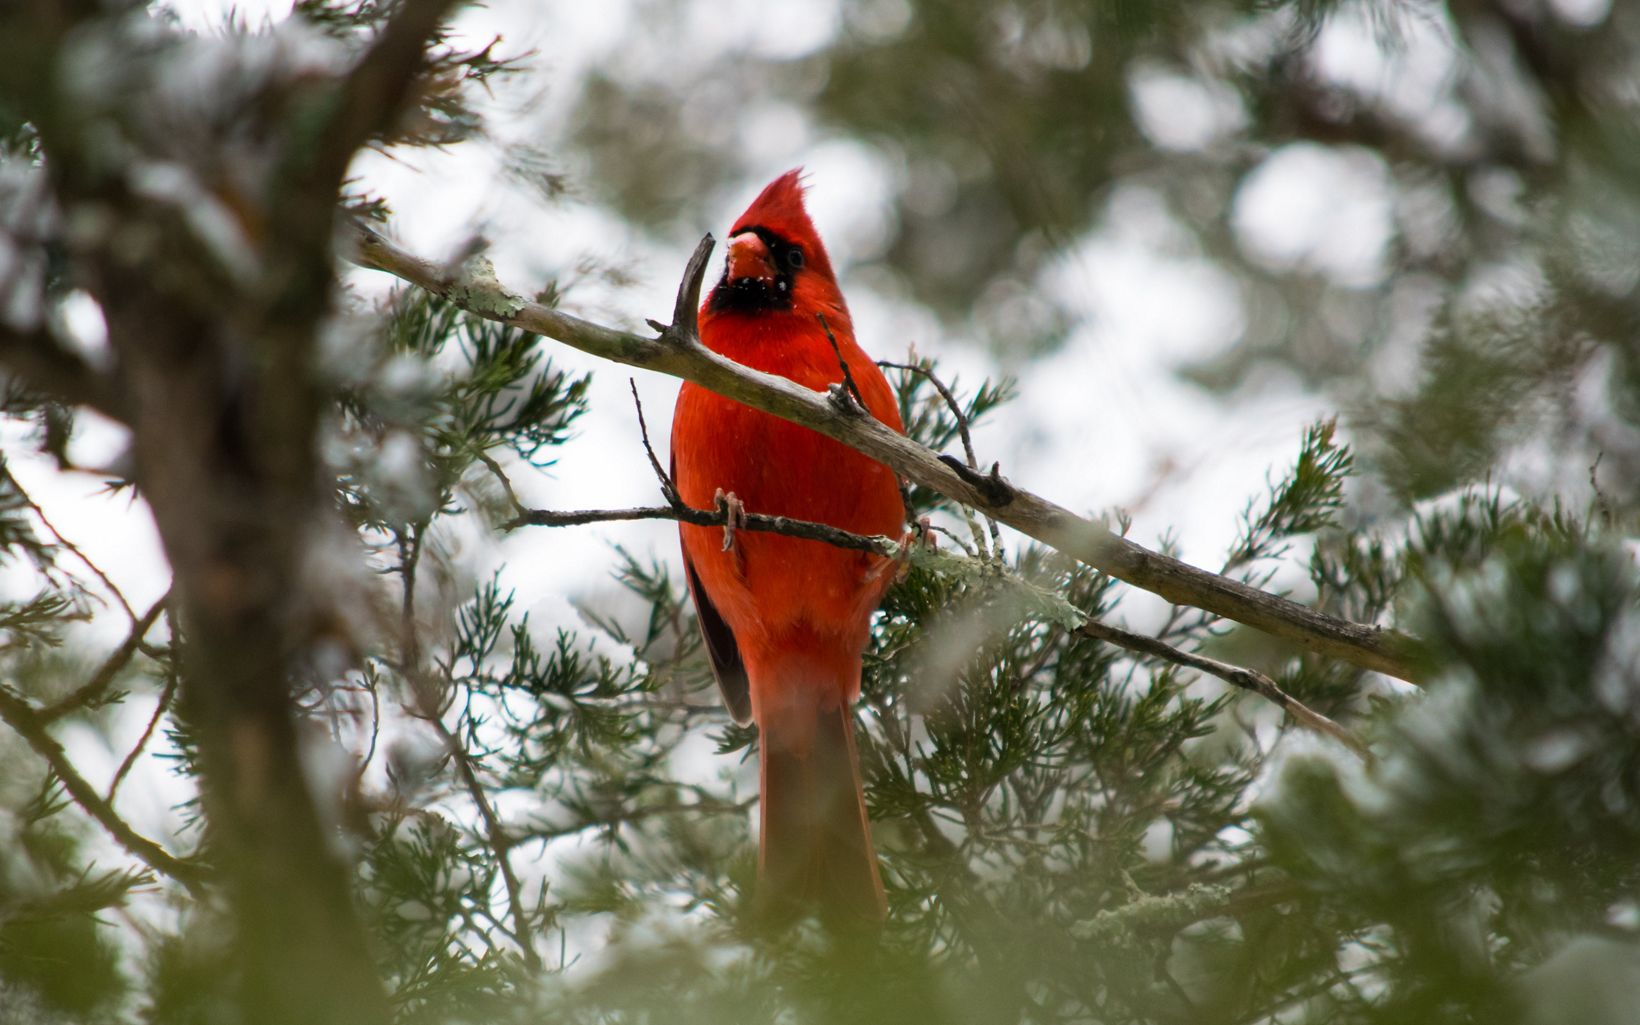 A red cardinal viewed from below through tree branches.